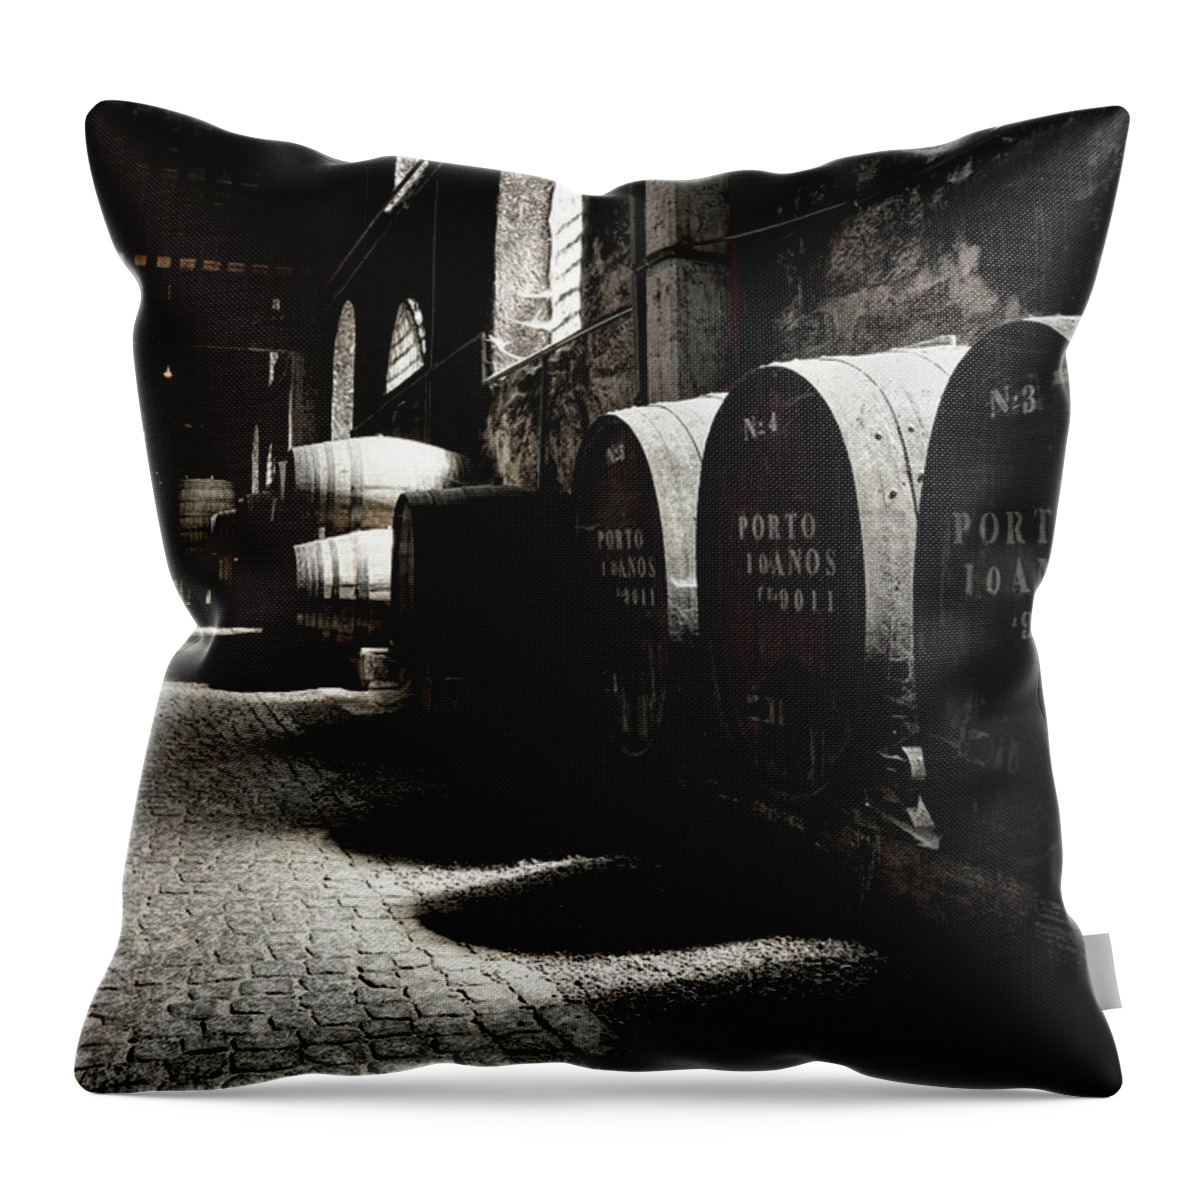 Desaturated Throw Pillow featuring the photograph Old Porto Wine Cellar #1 by Vuk8691